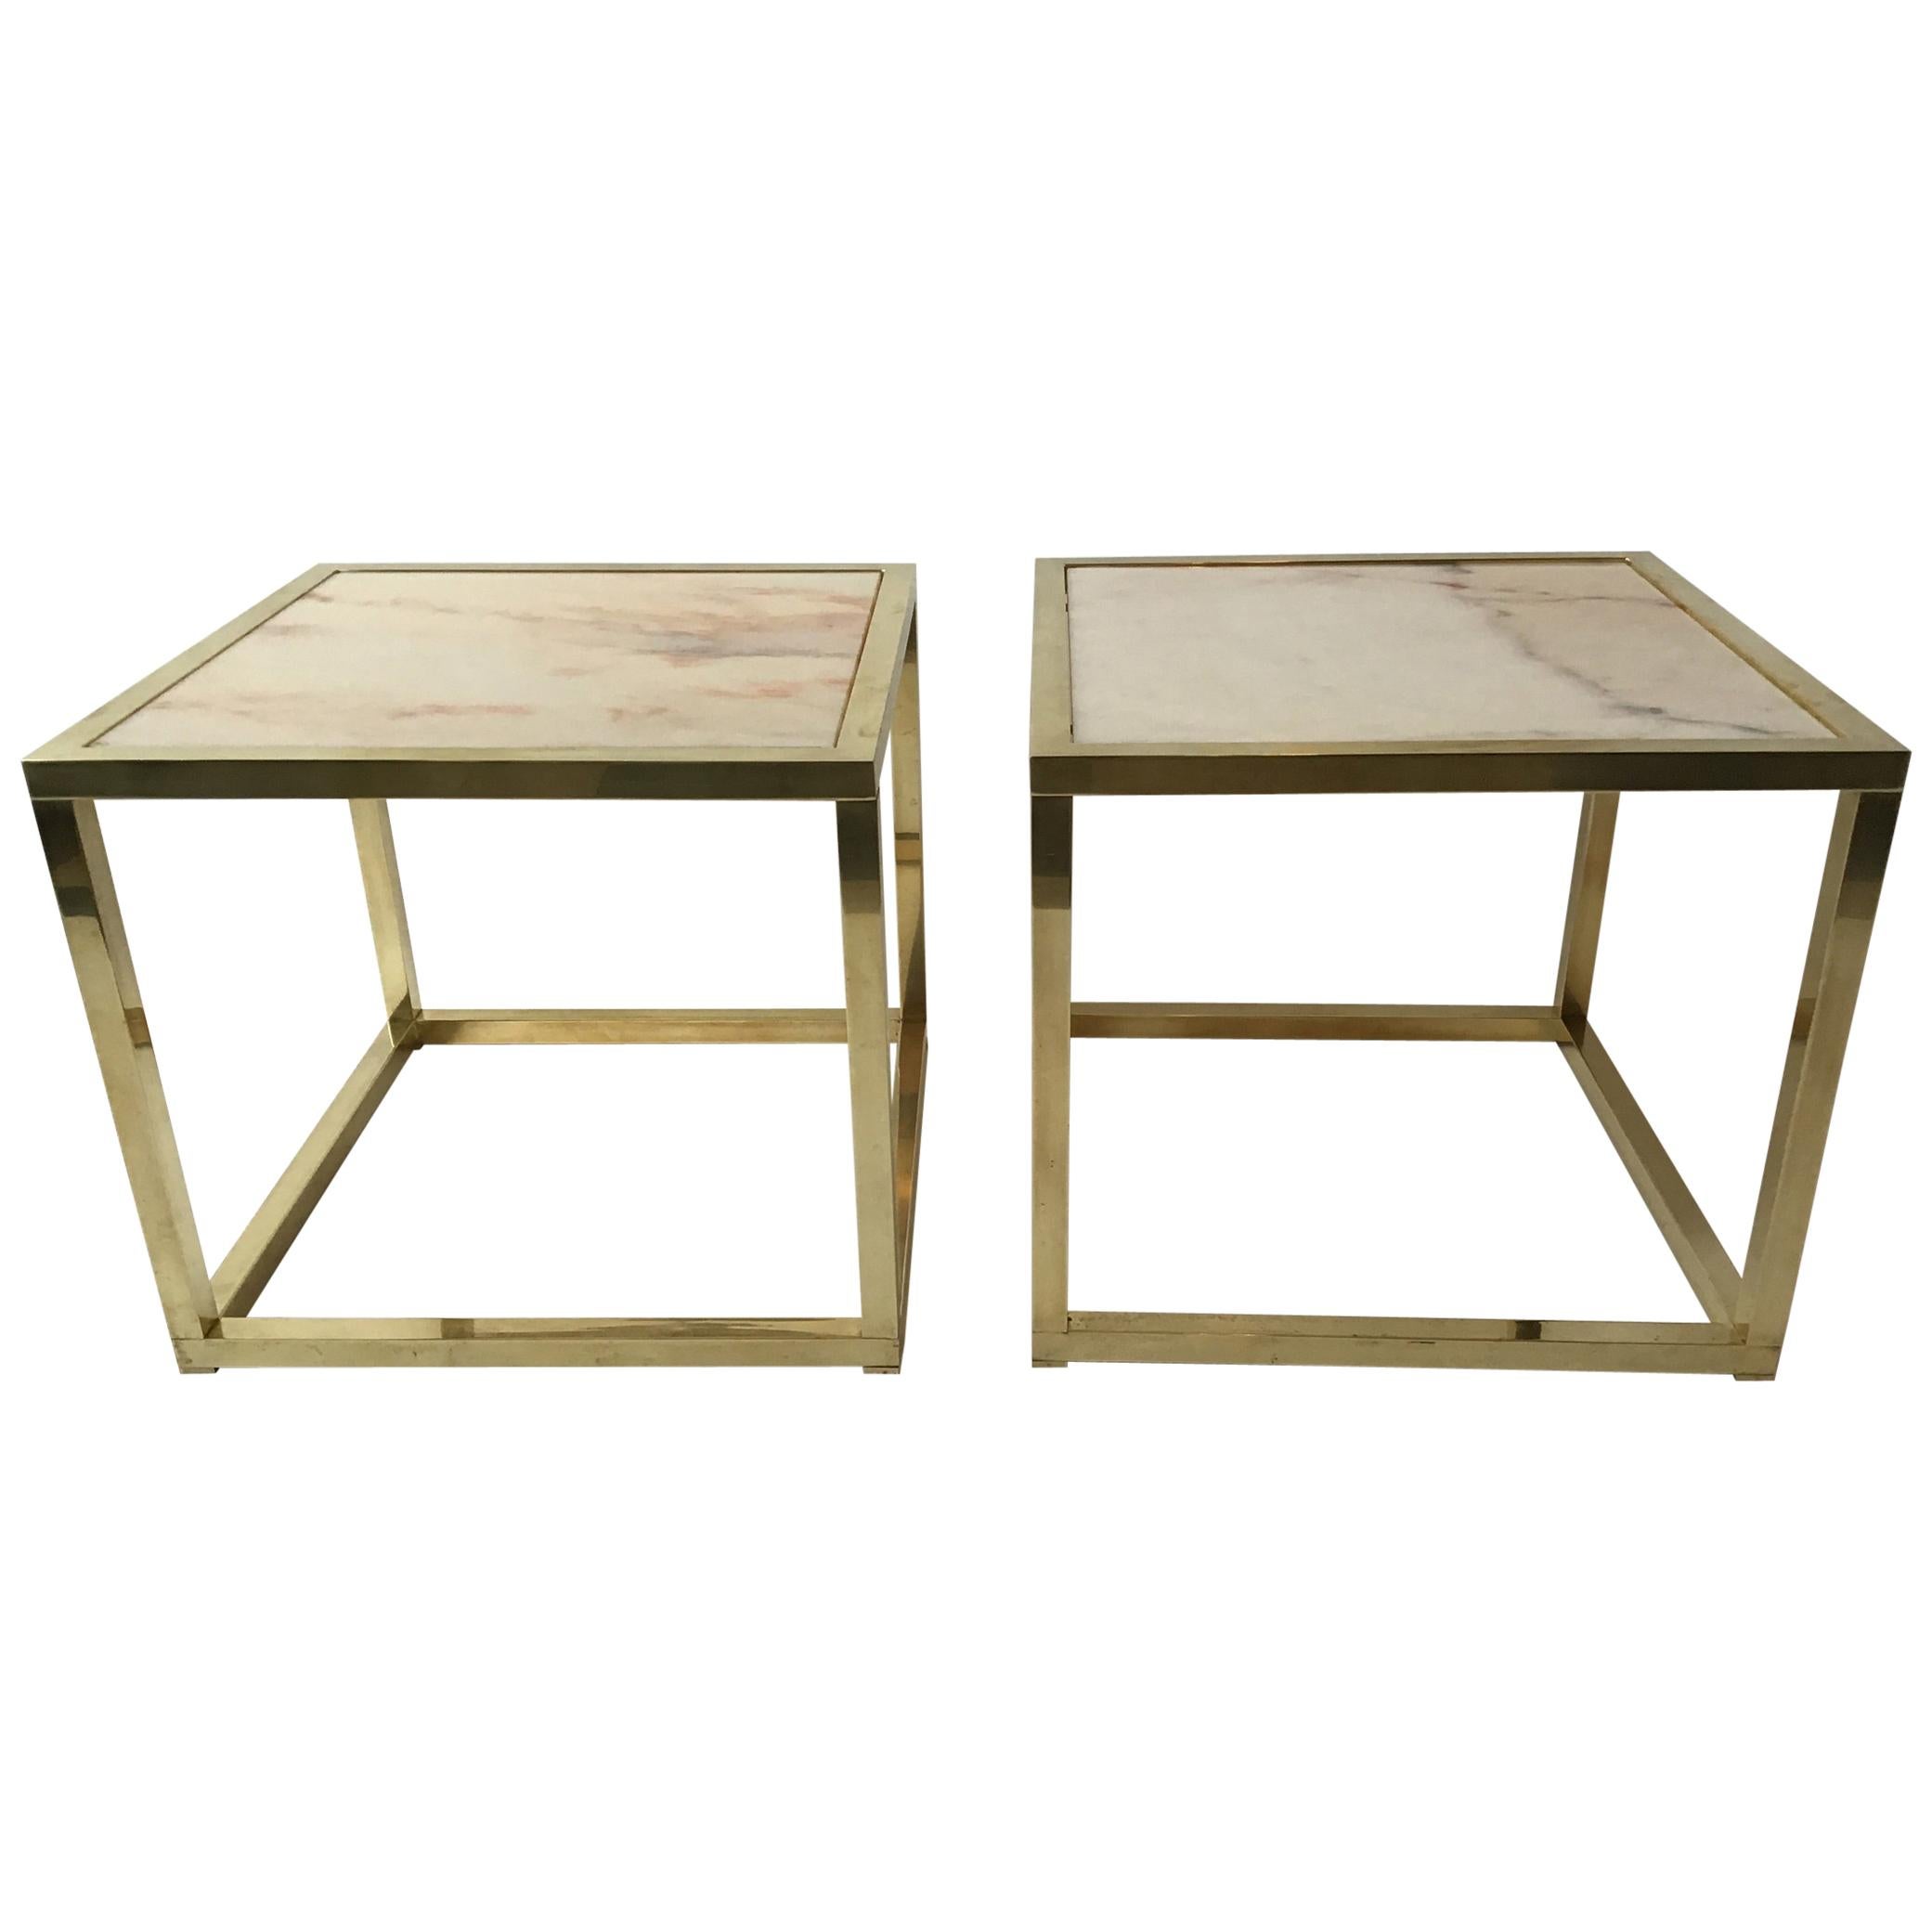 Pair of 1970s Brass Cube Tables with Marble Tops